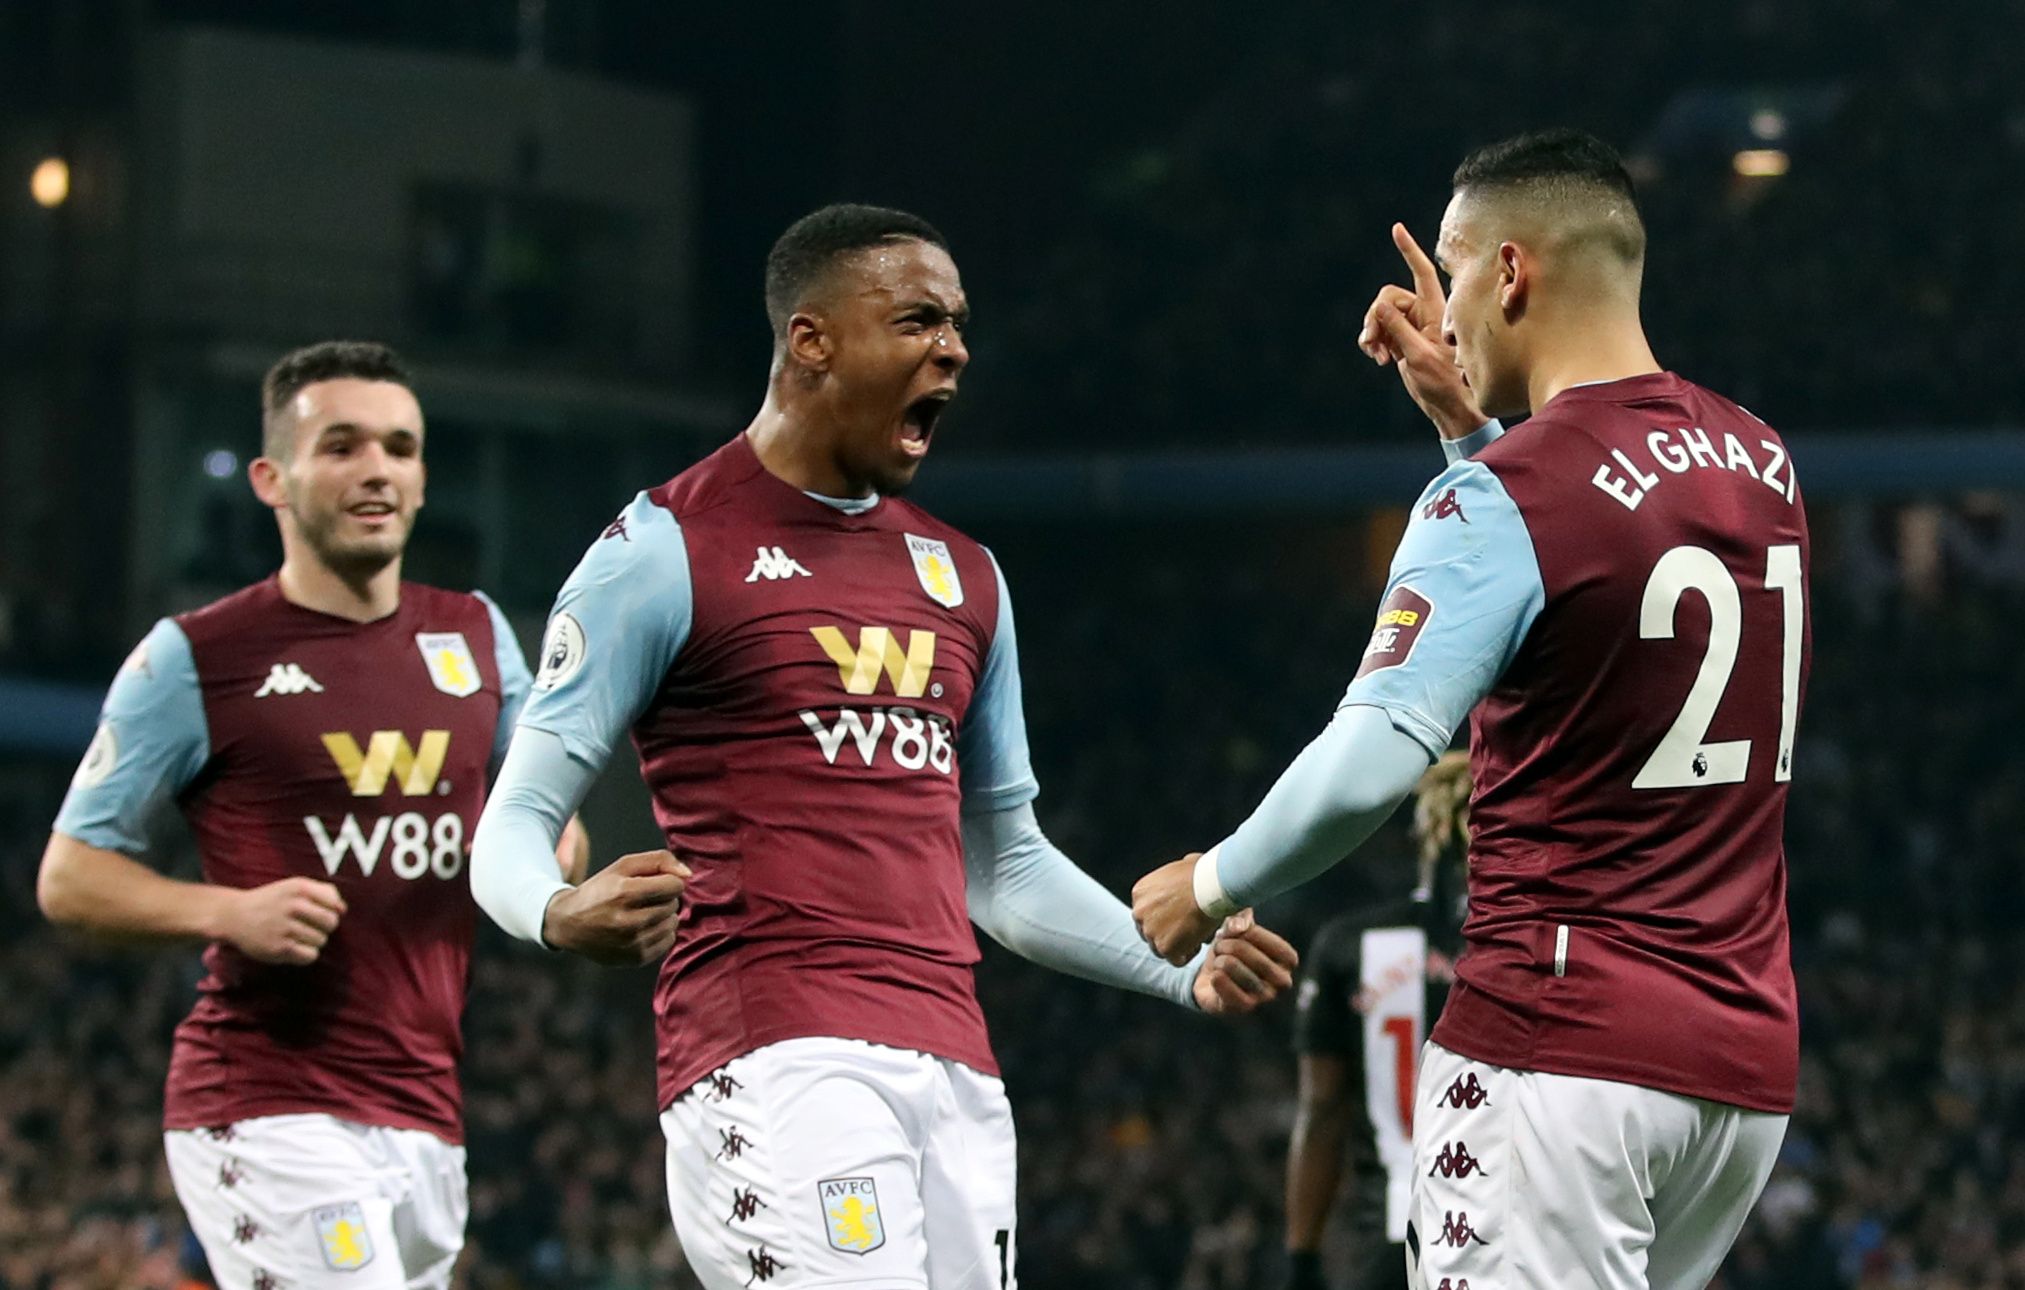 Soccer Football - Premier League - Aston Villa v Newcastle United - Villa Park, Birmingham, Britain - November 25, 2019   Aston Villa's Anwar El Ghazi celebrates scoring their second goal with Ezri Konsa and John McGinn    Action Images via Reuters/Carl Recine    EDITORIAL USE ONLY. No use with unauthorized audio, video, data, fixture lists, club/league logos or "live" services. Online in-match use limited to 75 images, no video emulation. No use in betting, games or single club/league/player pu